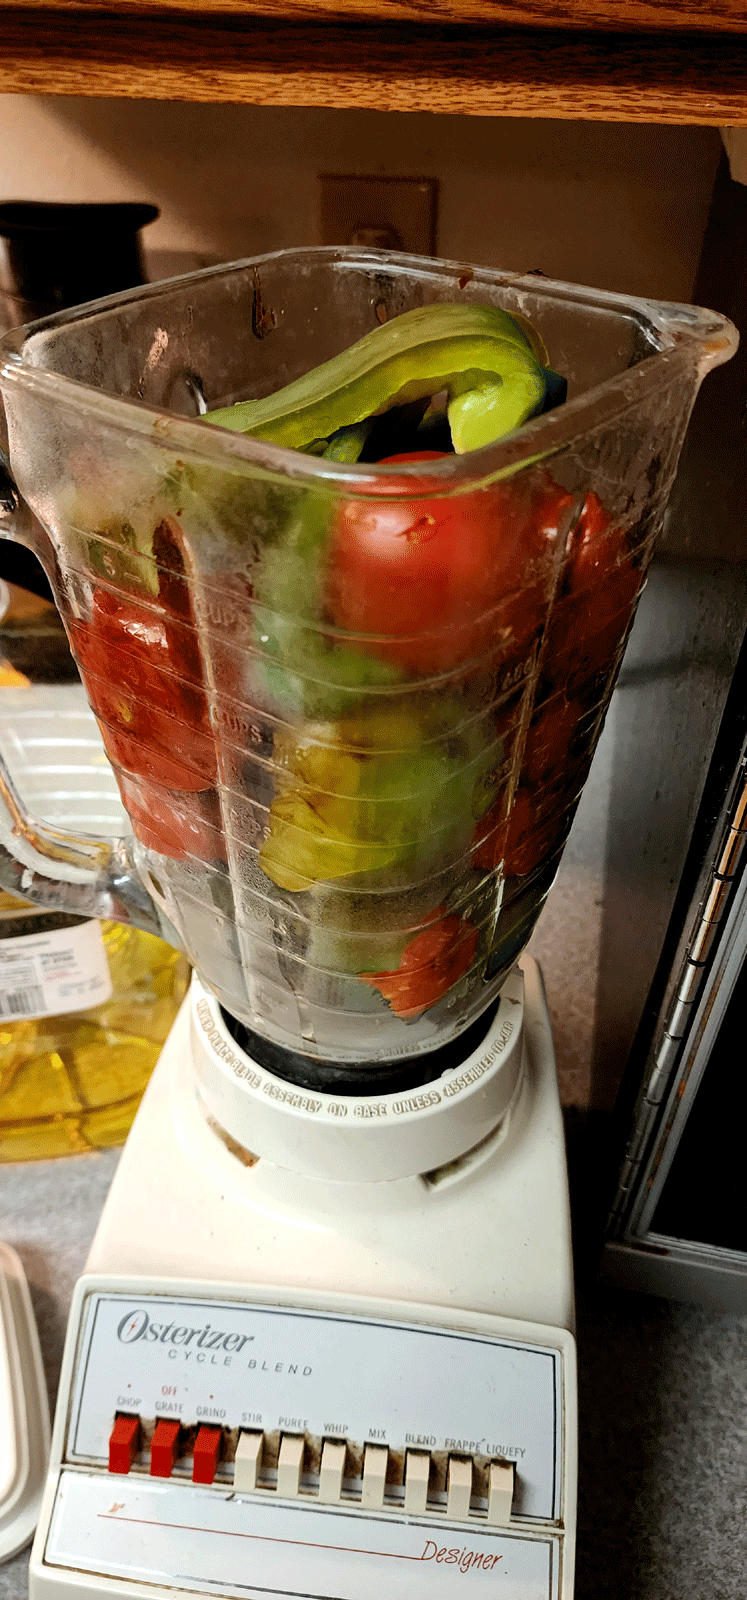 Animated photo Blender with unblended vegetables switches to blended vegetables